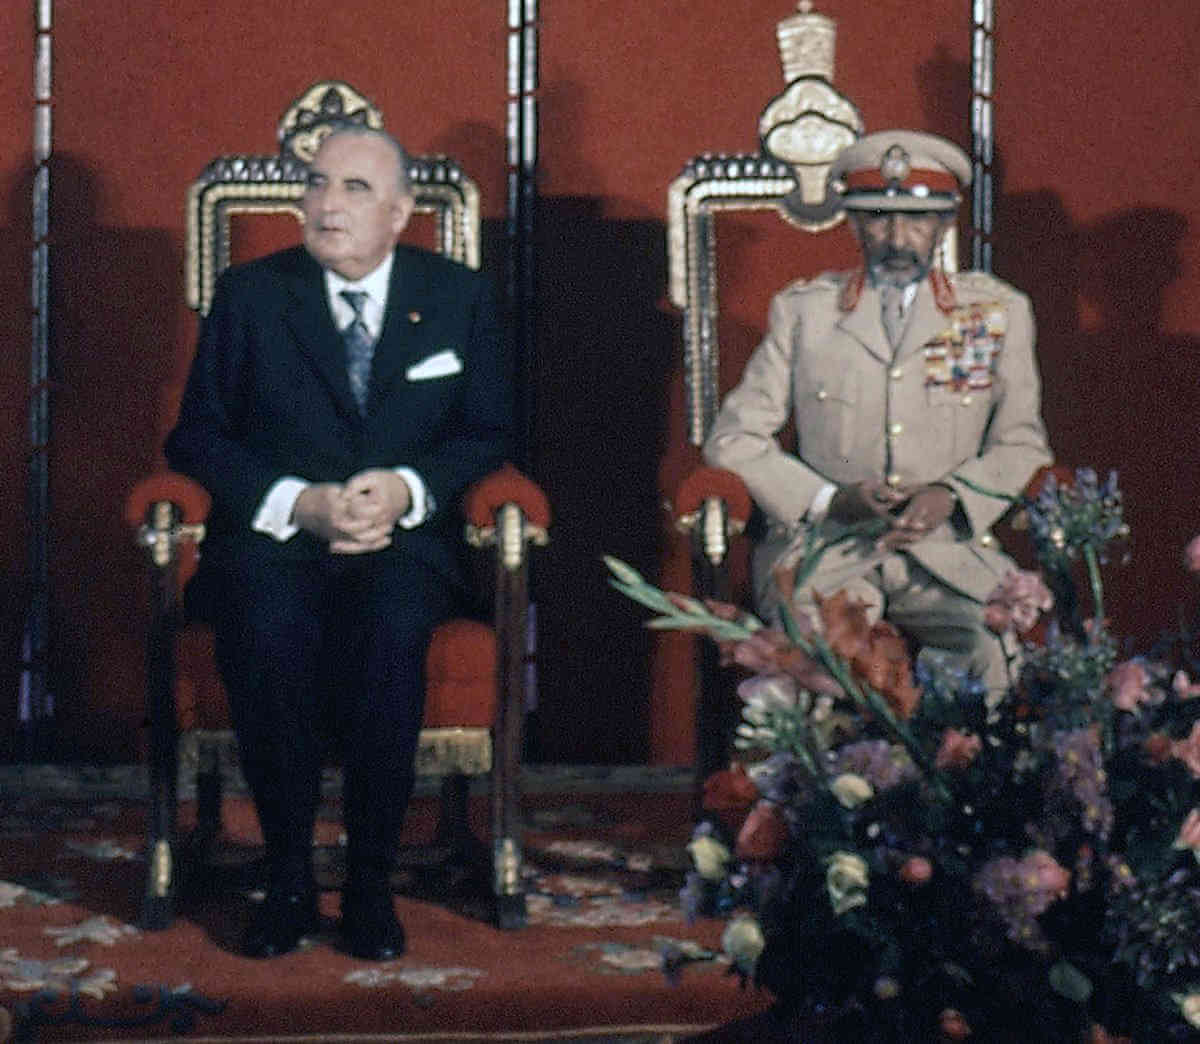 French President Georges Pompidou sitting at left, next to Emperor of Ethiopia, Haile Selassie I during the former's visit to Addis Ababa, Ethiopia on Jan. 17, 1973.